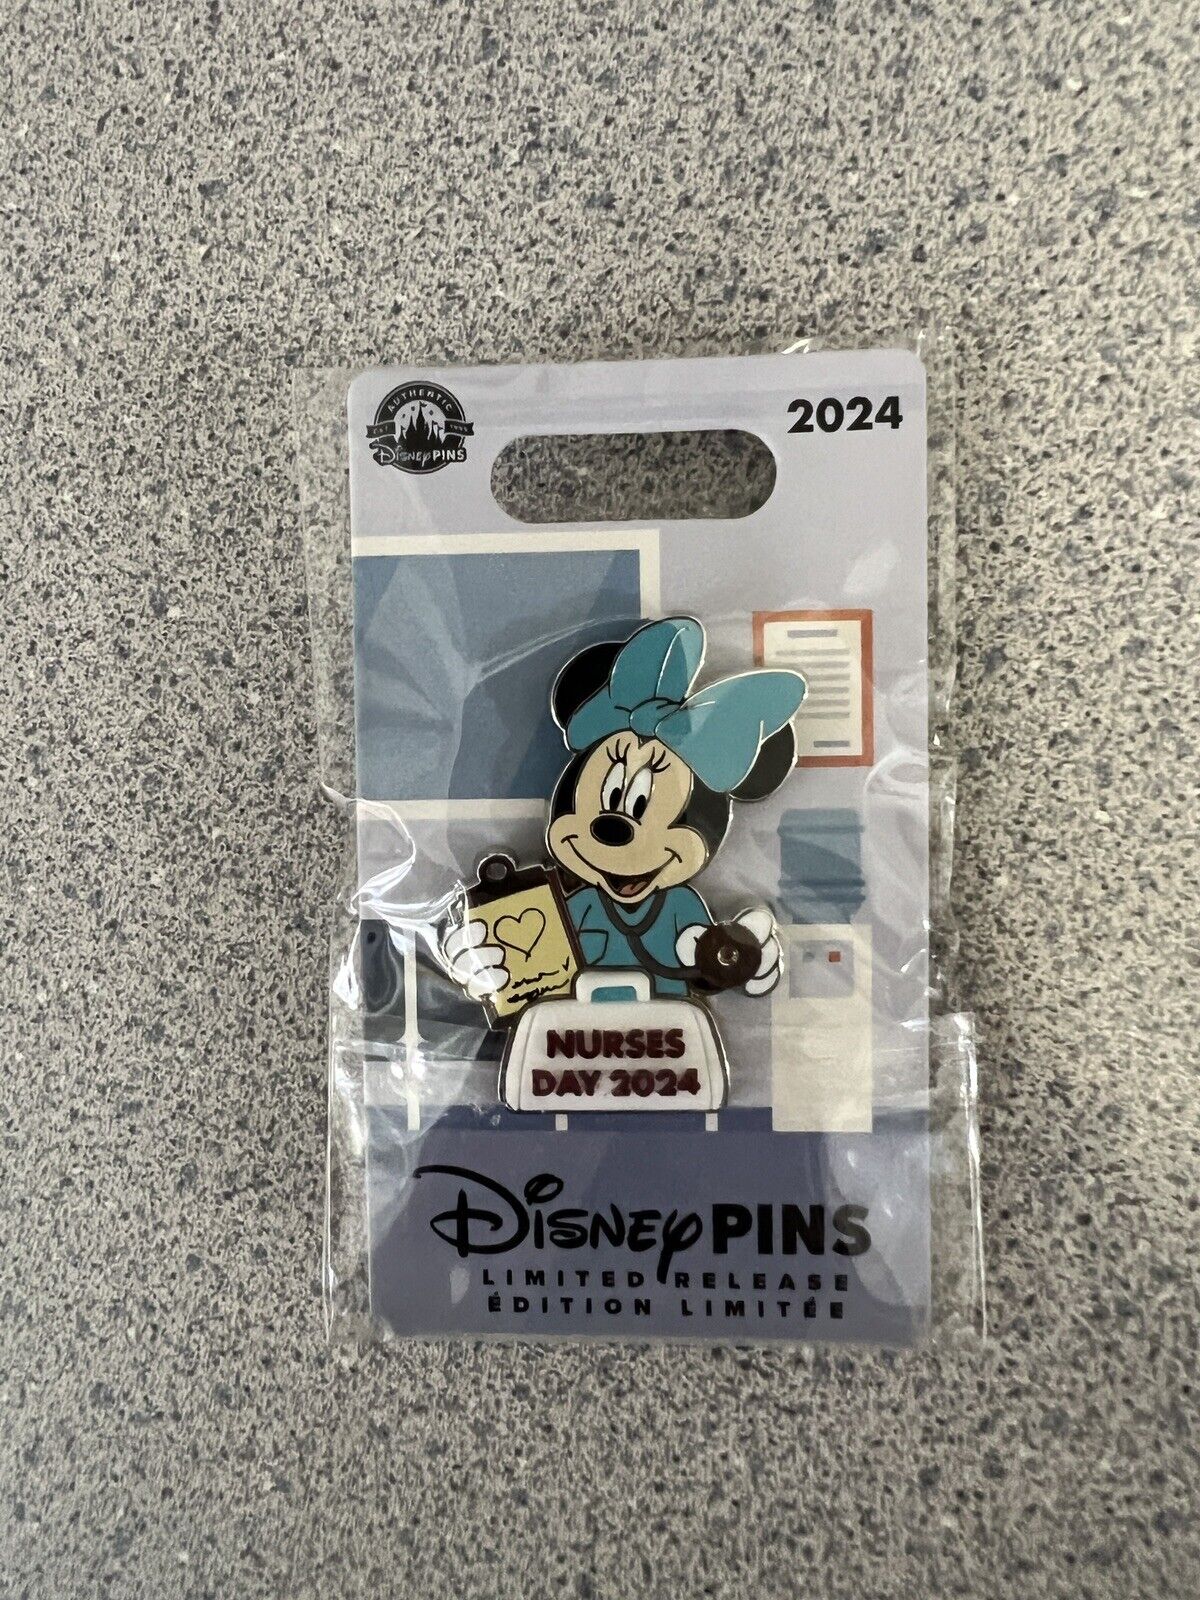 Disney Pin Disneyland Nurses Day 2024 Minnie Mouse Limited Release